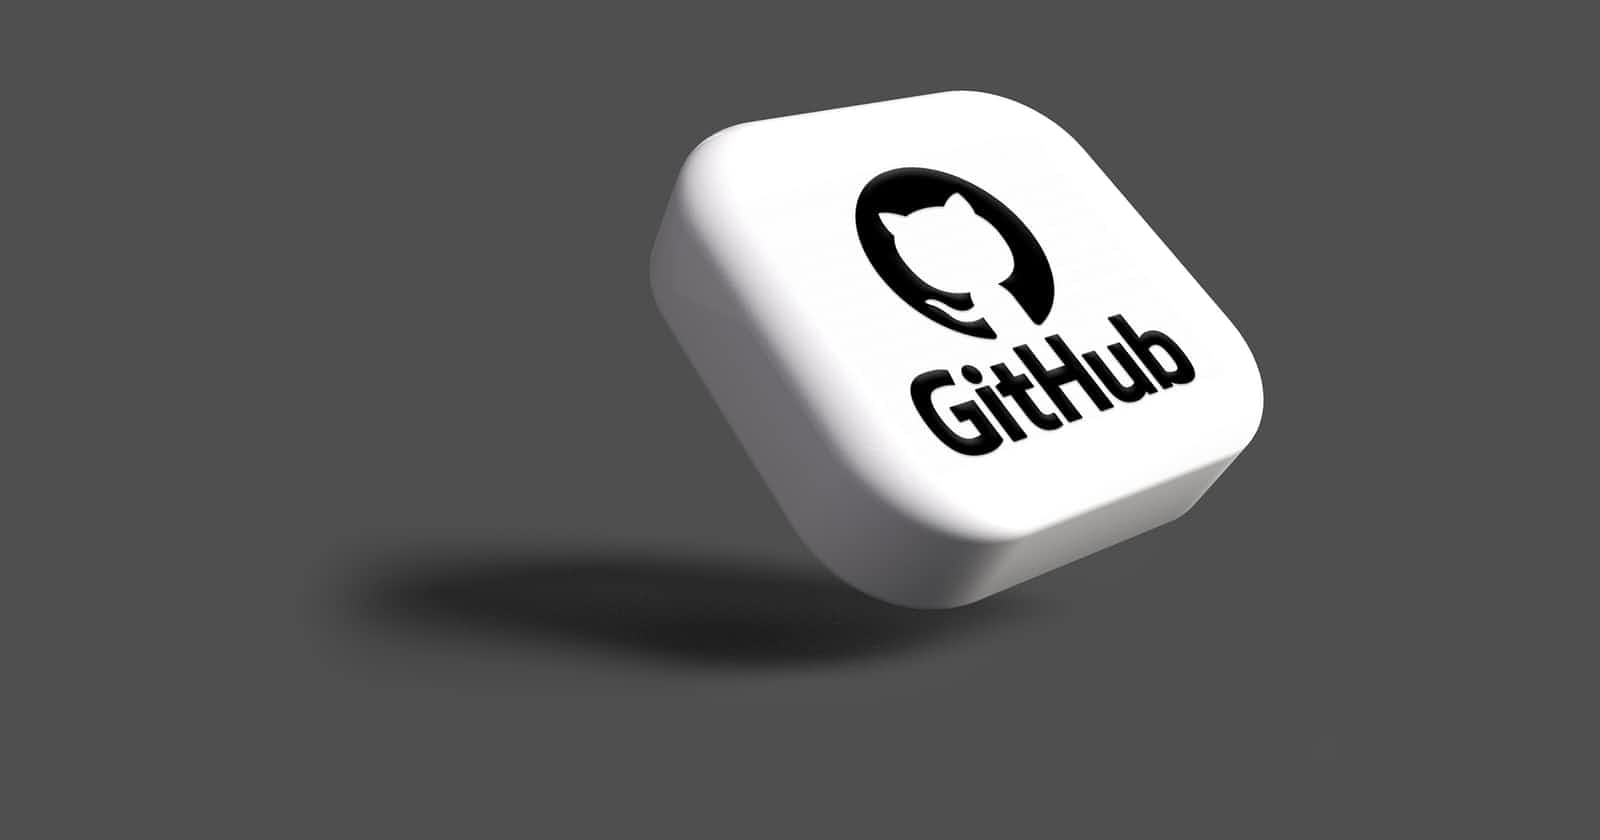 How to get SSH public keys for any user from GitHub